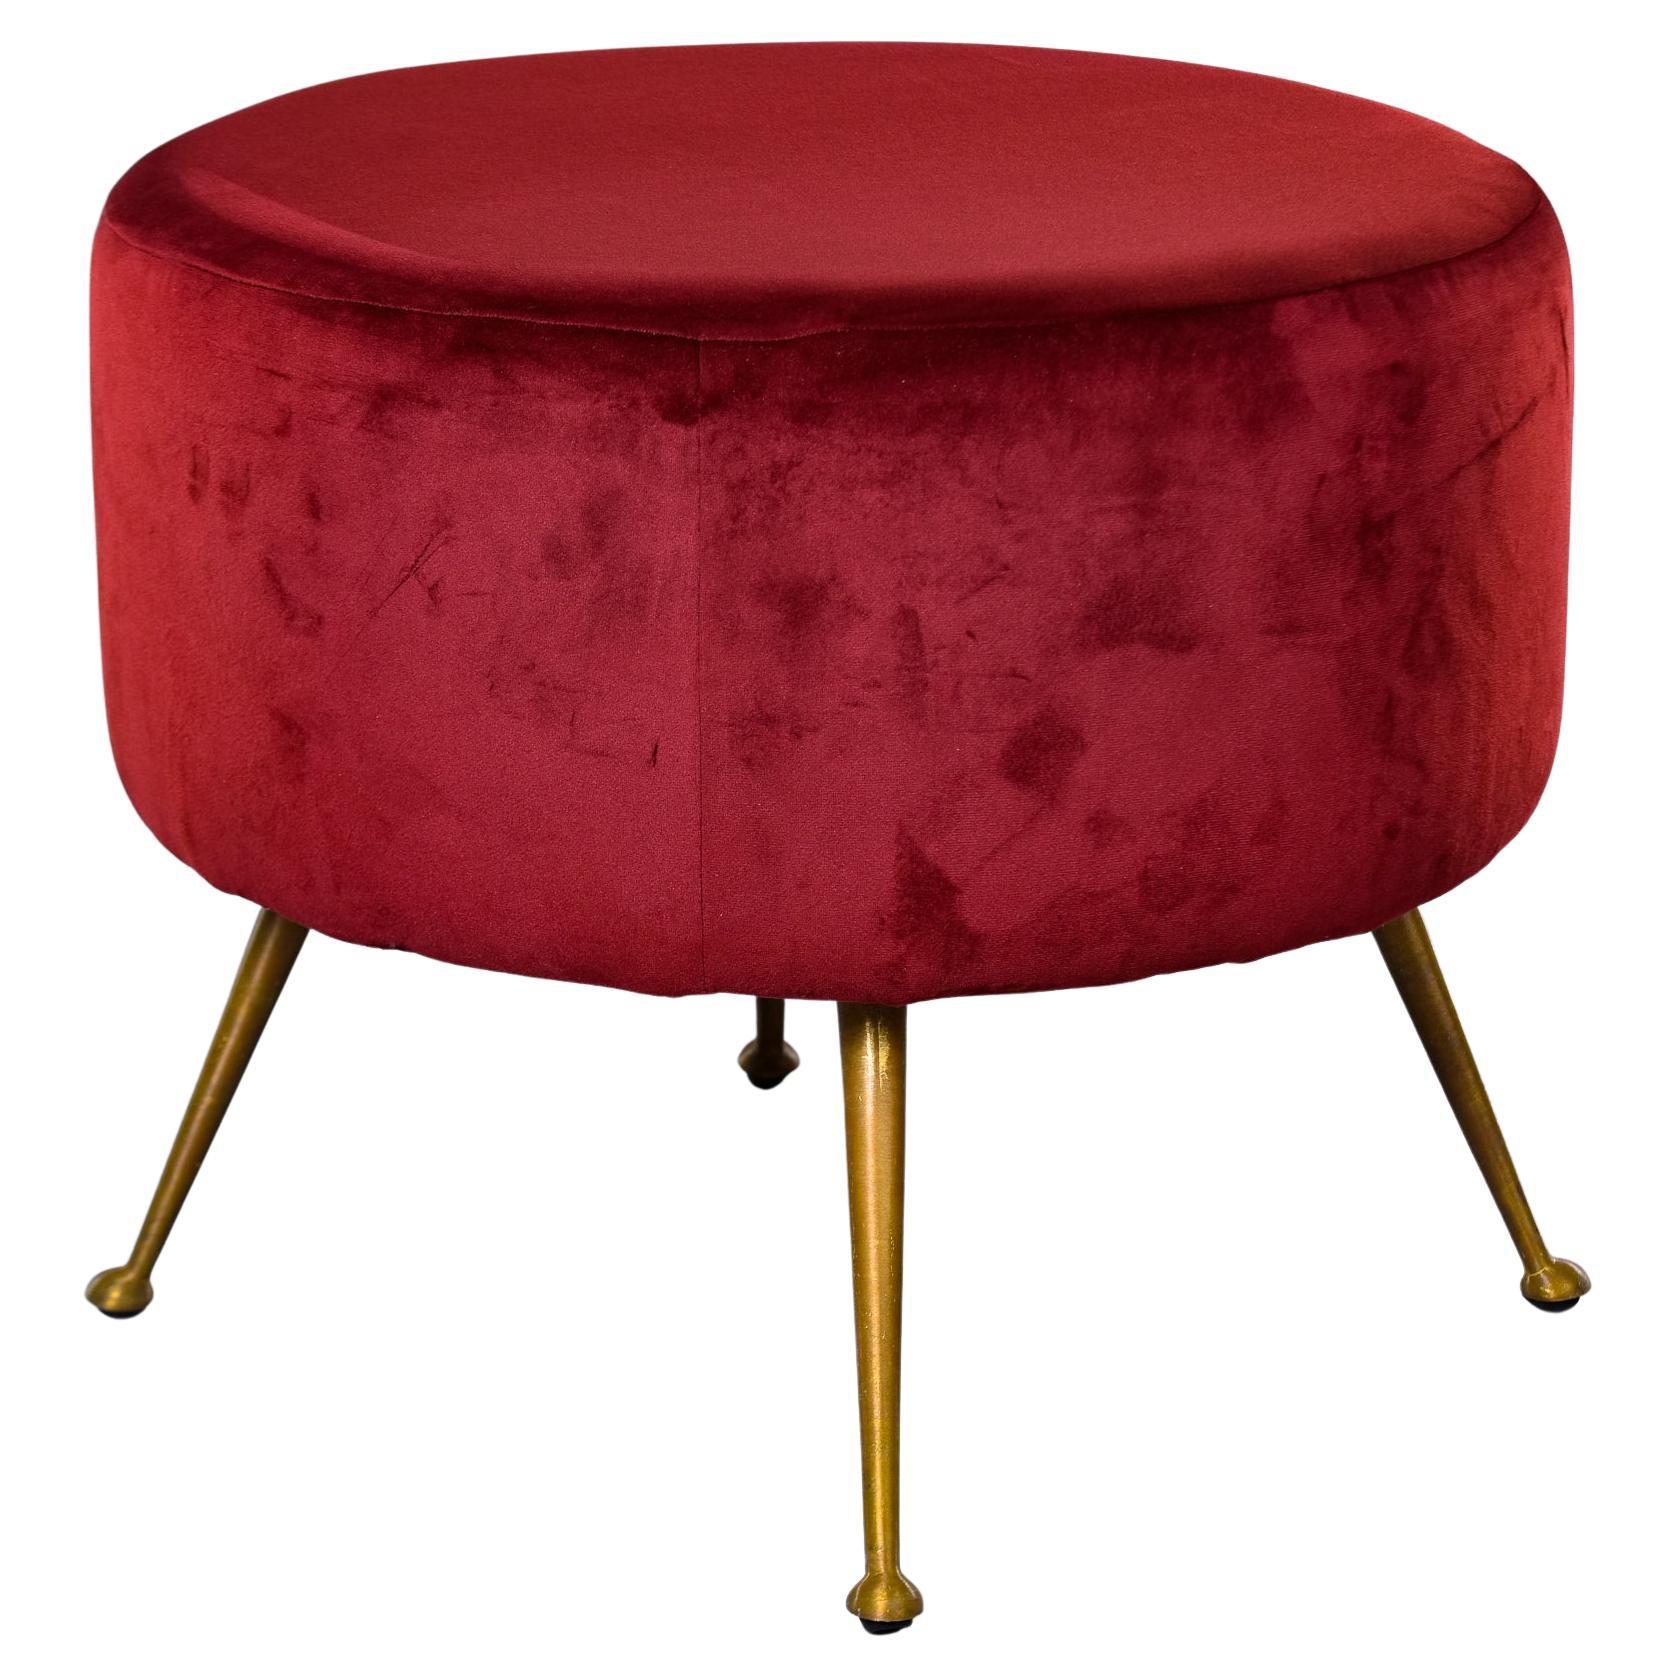 Italian Midcentury Round Stool with Red Upholstery and Brass Legs For Sale